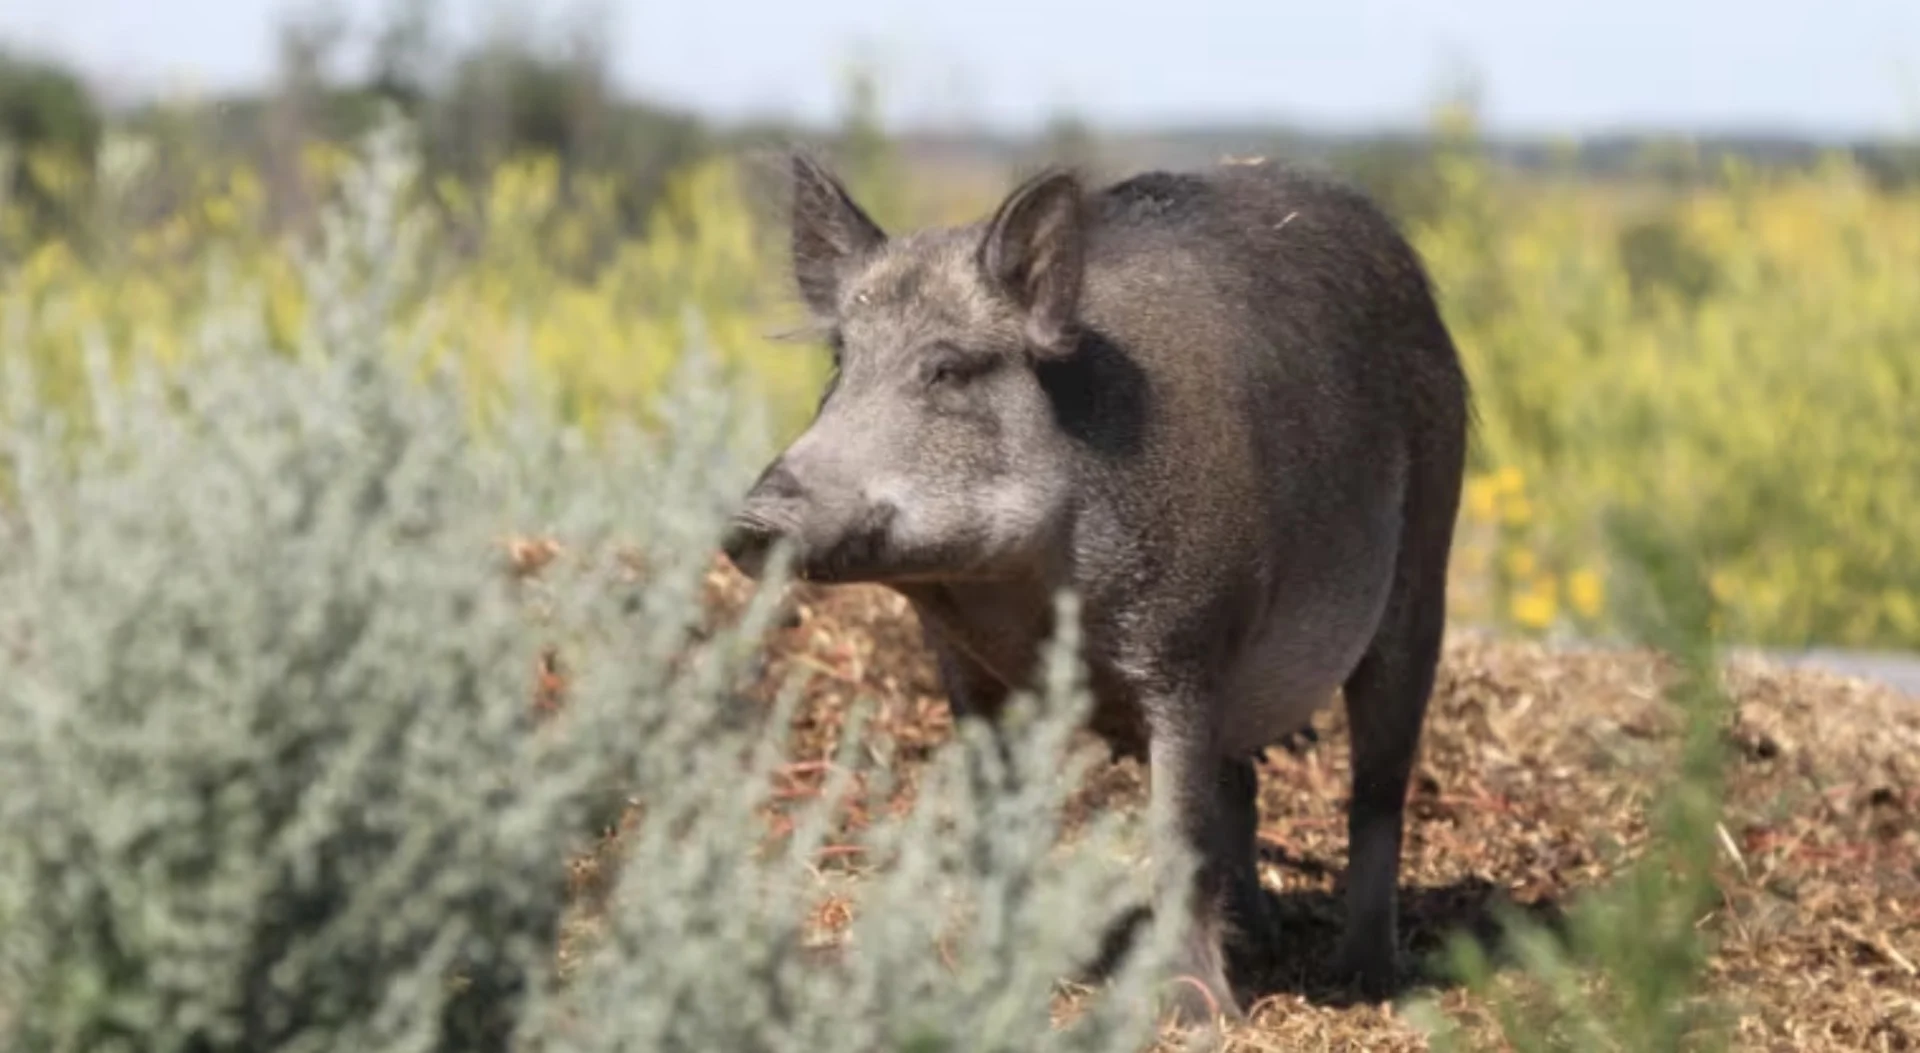 Wild boar/Submitted by Ryan Brook via CBC